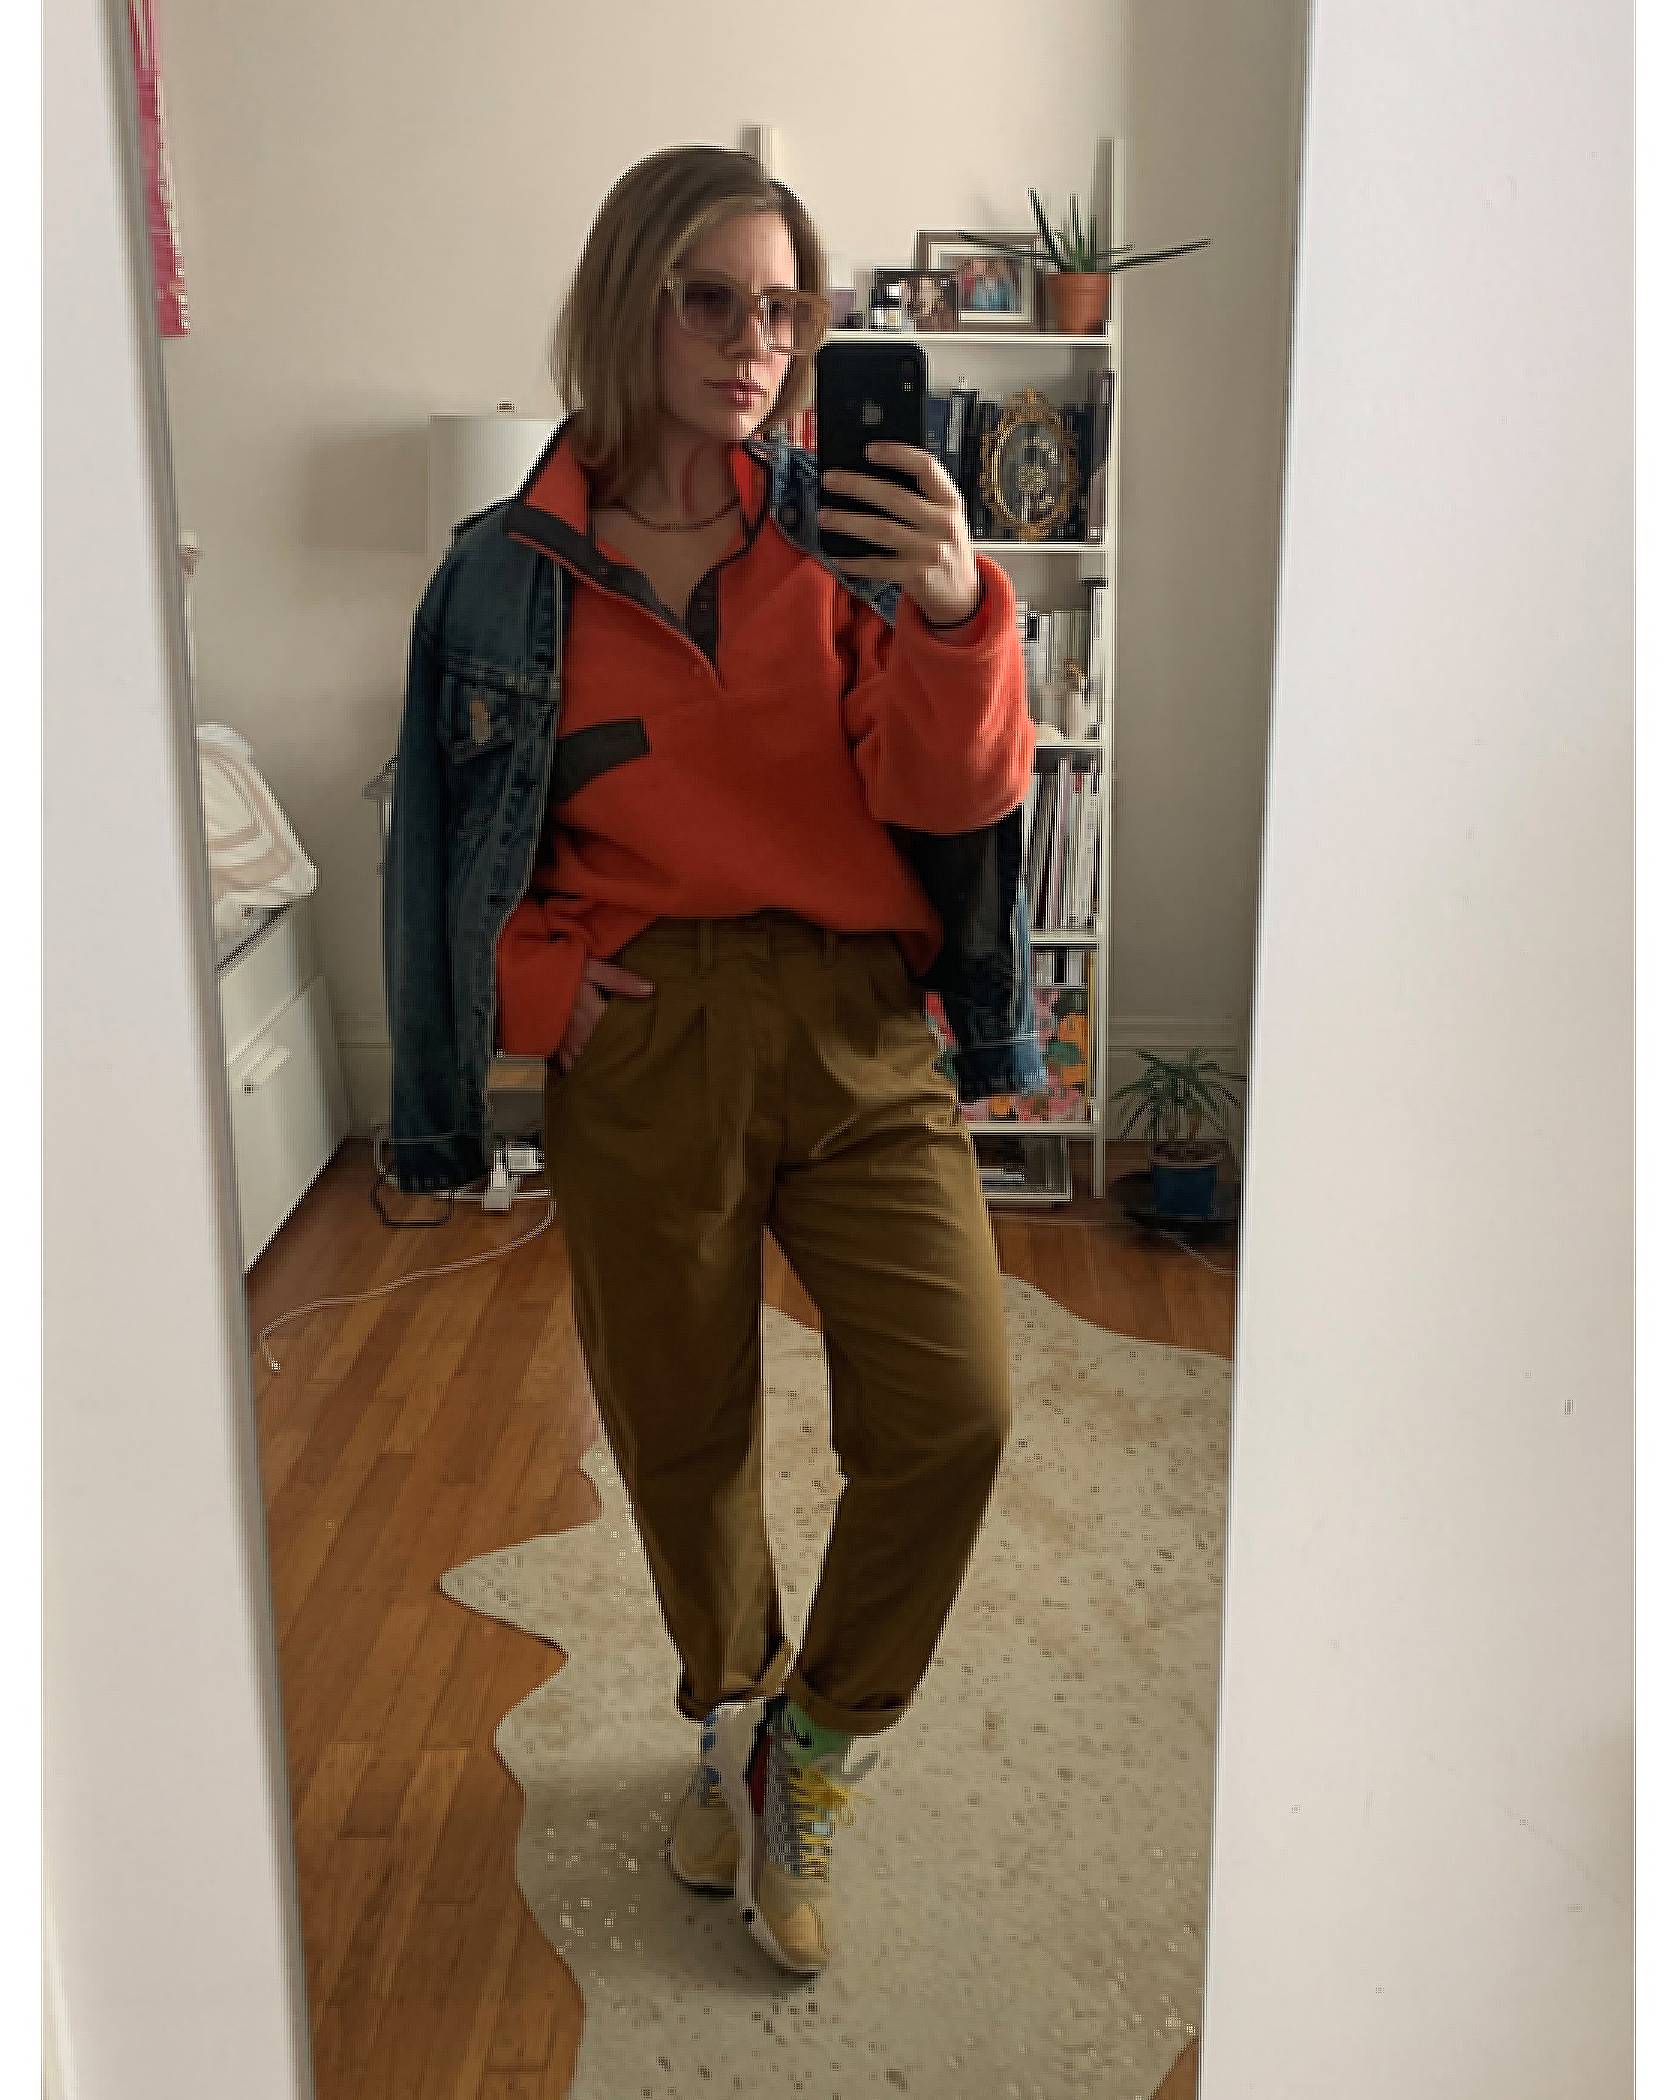 A mirror selfie of Haley Mitgang. She is wearing a red pullover fleece, a Levi's Trucker Jacket, and khaki pleated Balloon pants with sneakers.